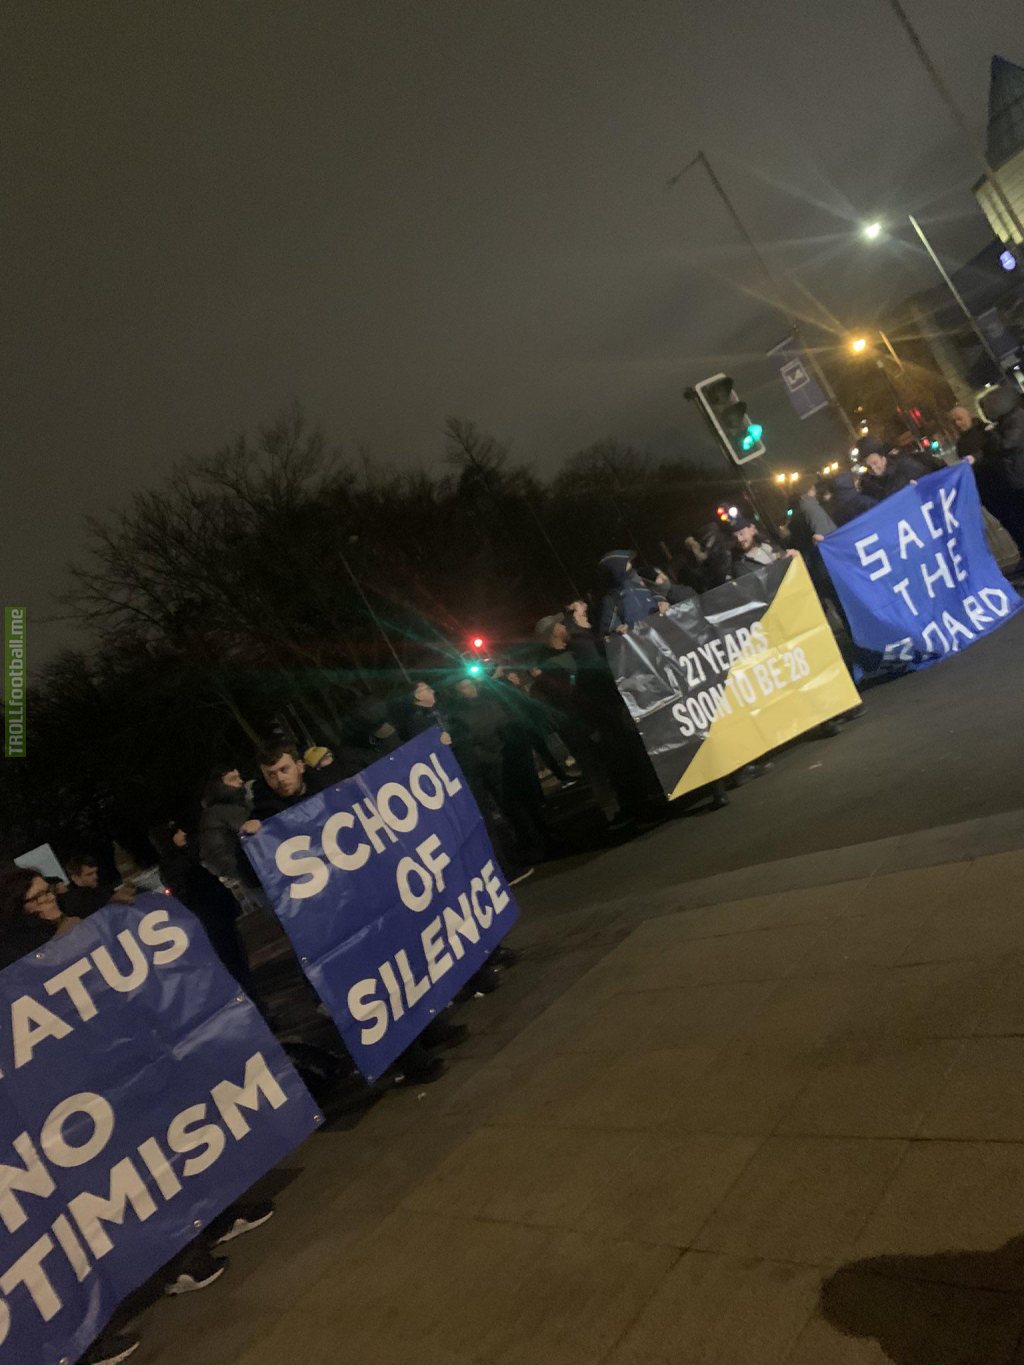 More protests outside Goodison Park tonight, with Sky seemingly there.